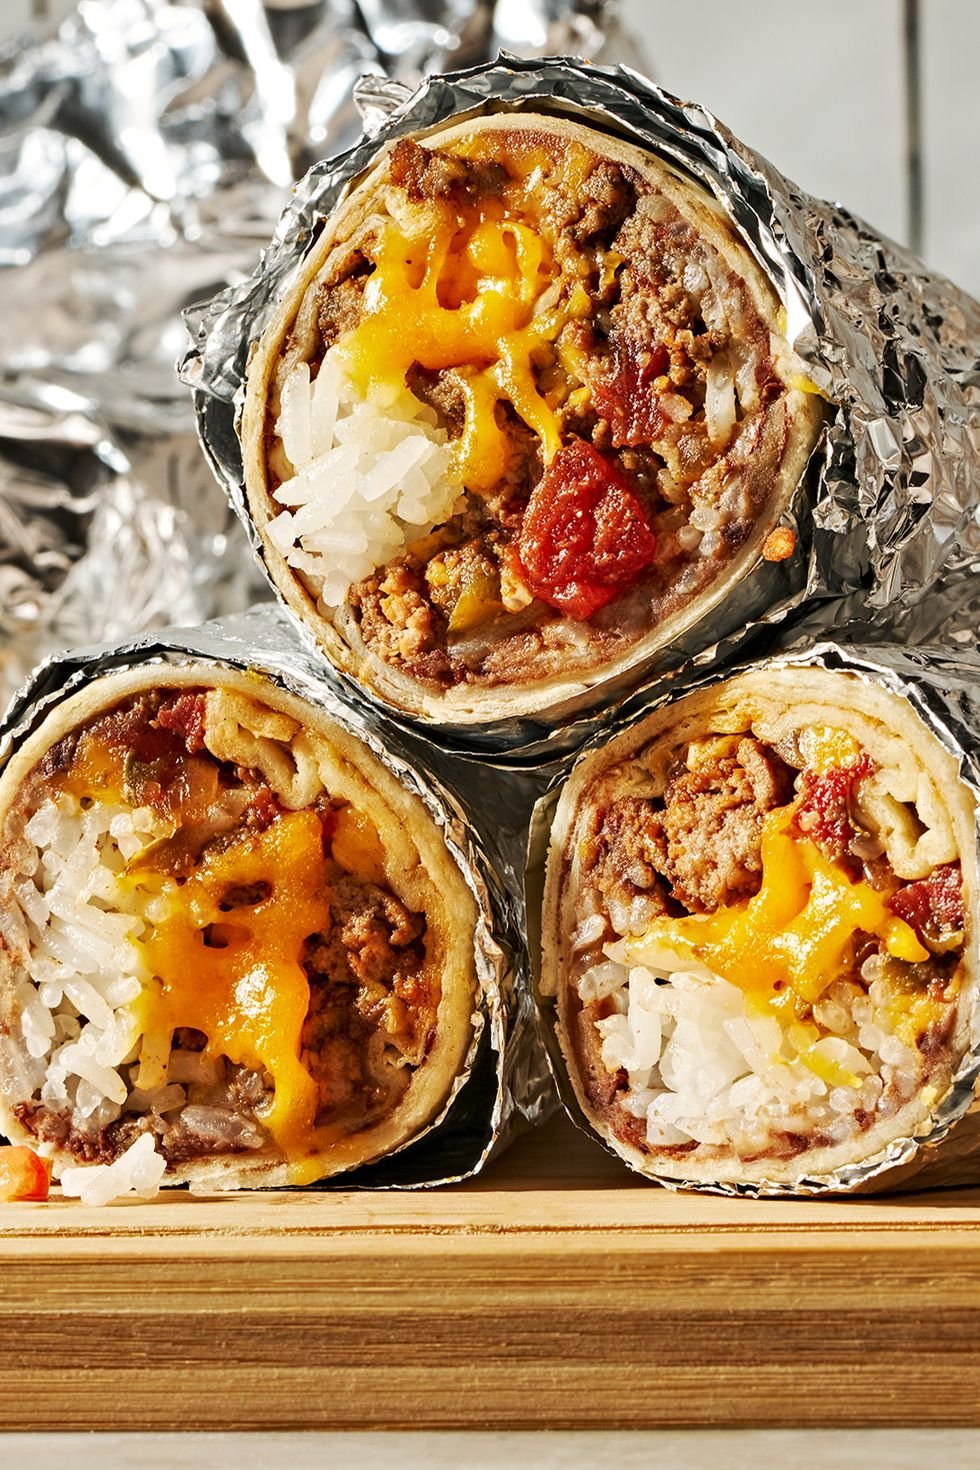 Burritos wrapped up in foil.